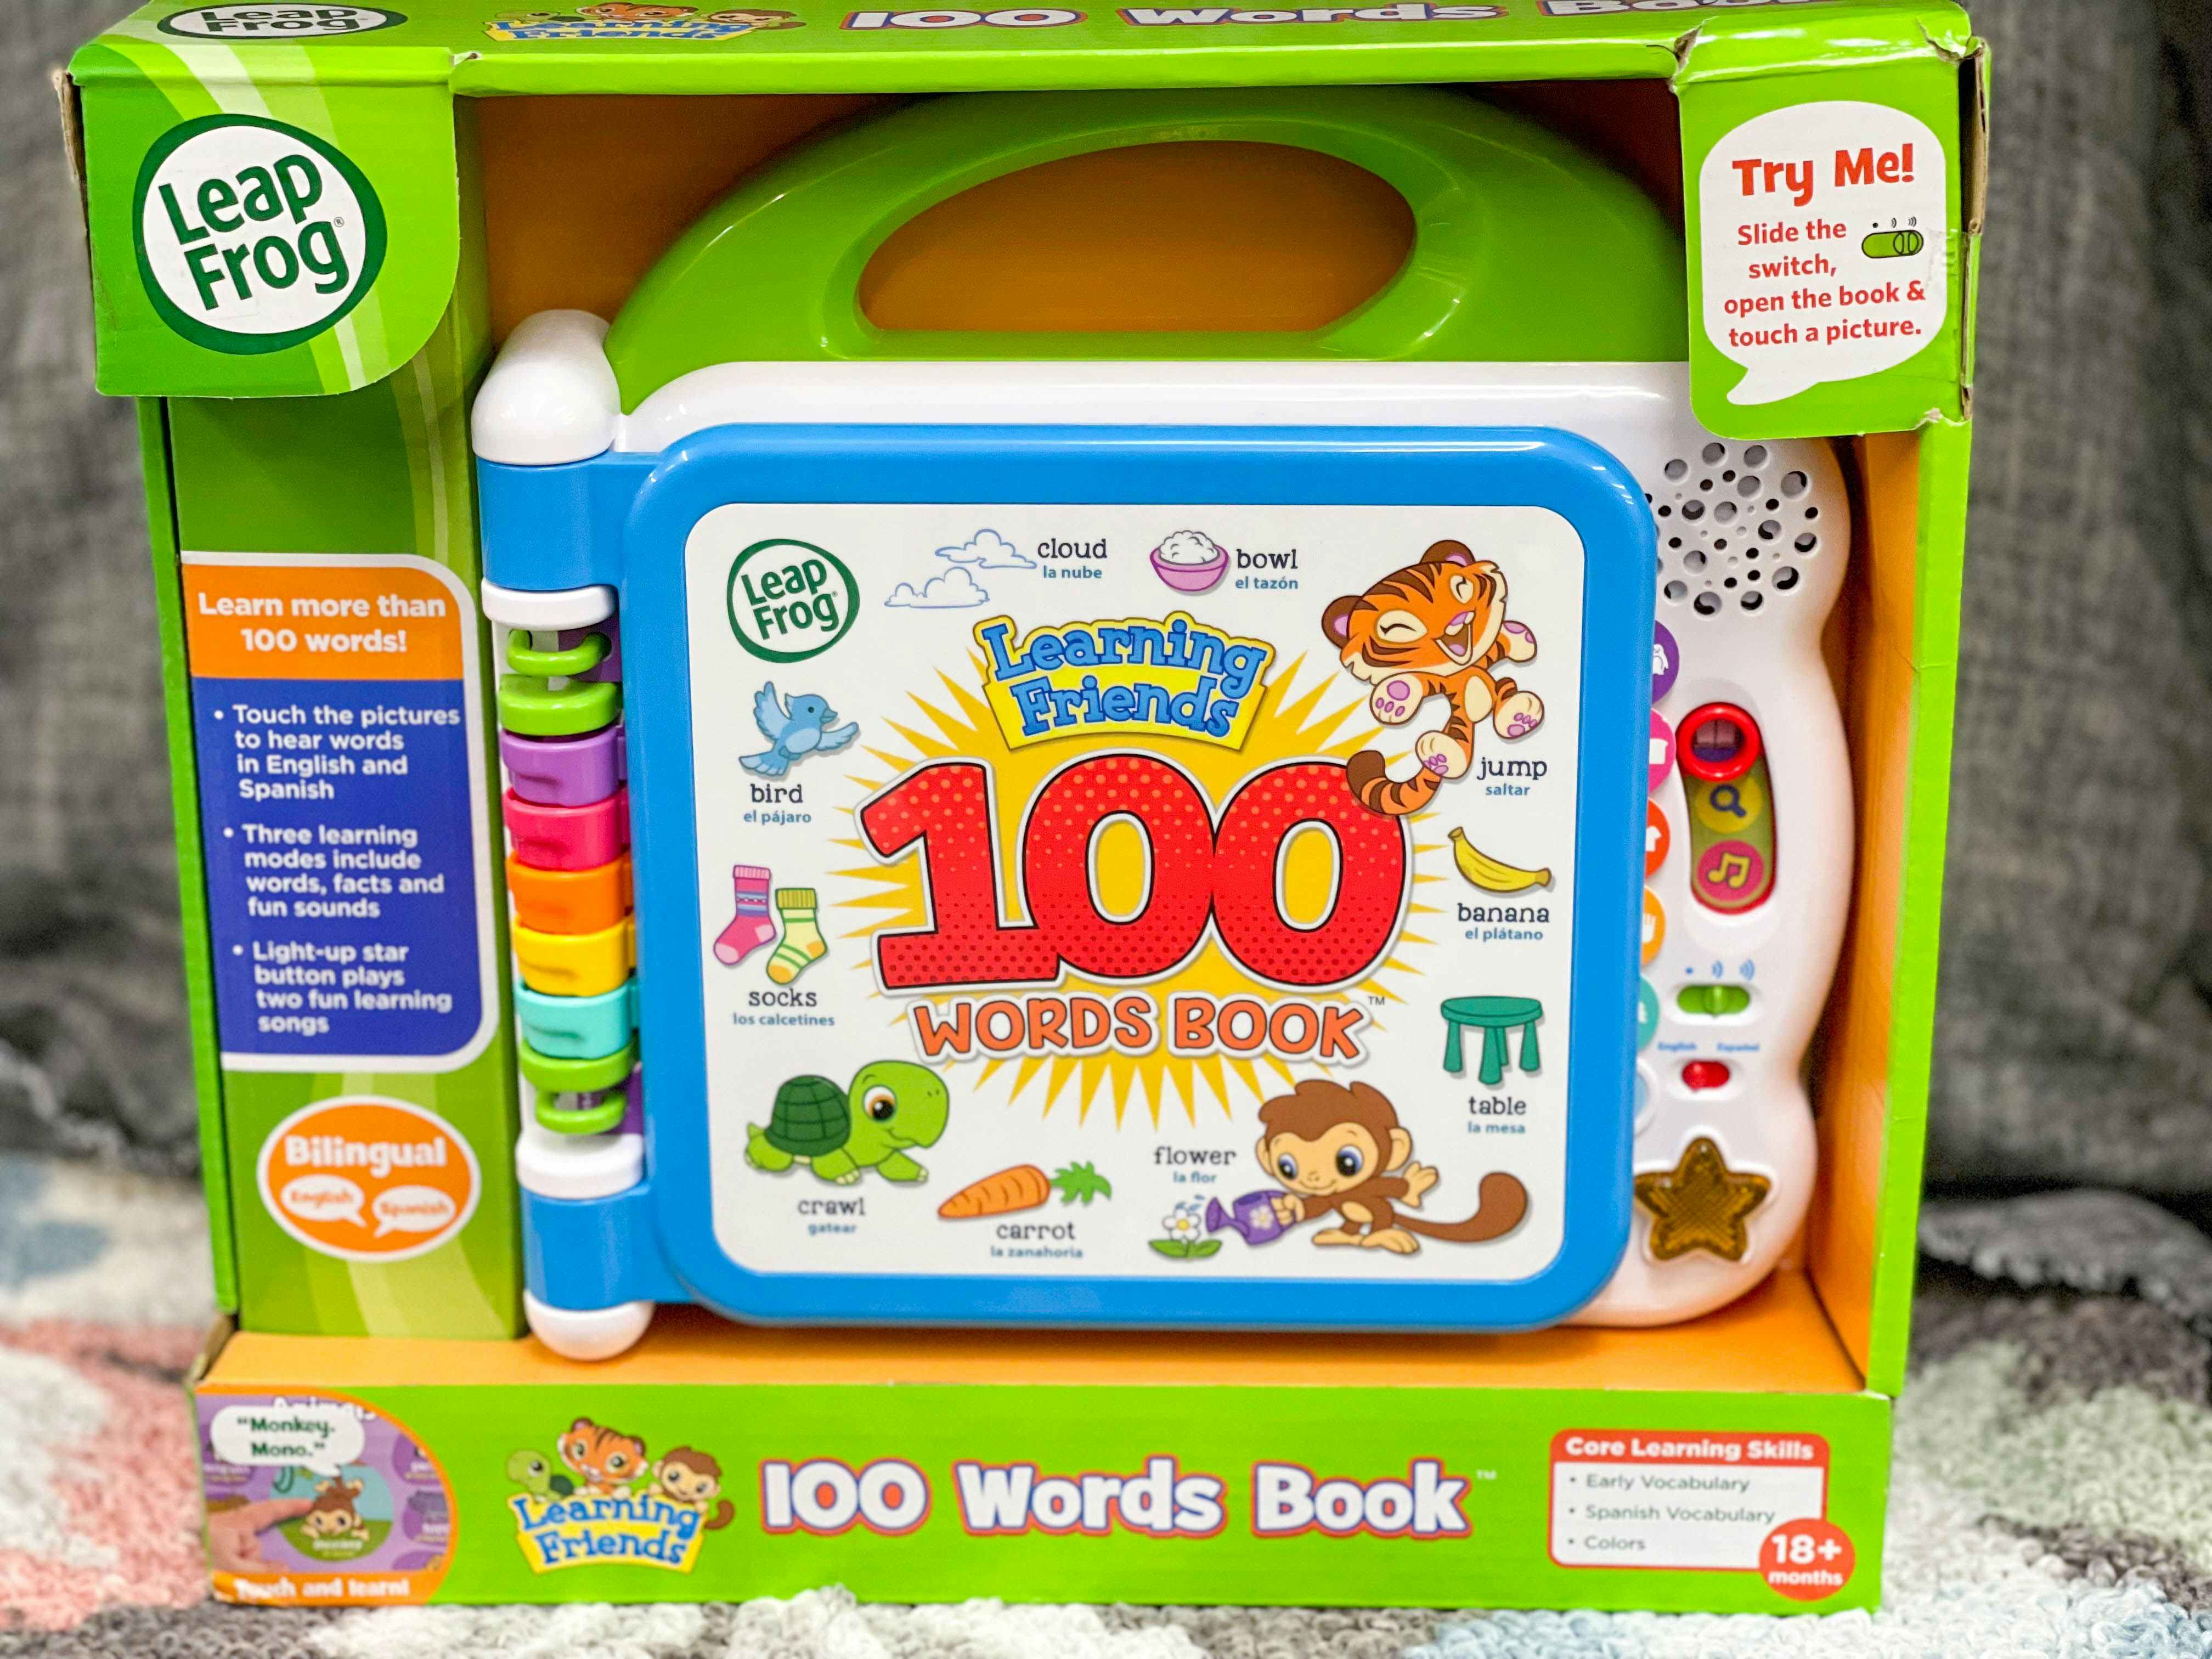 lead frog learning 100 words toy